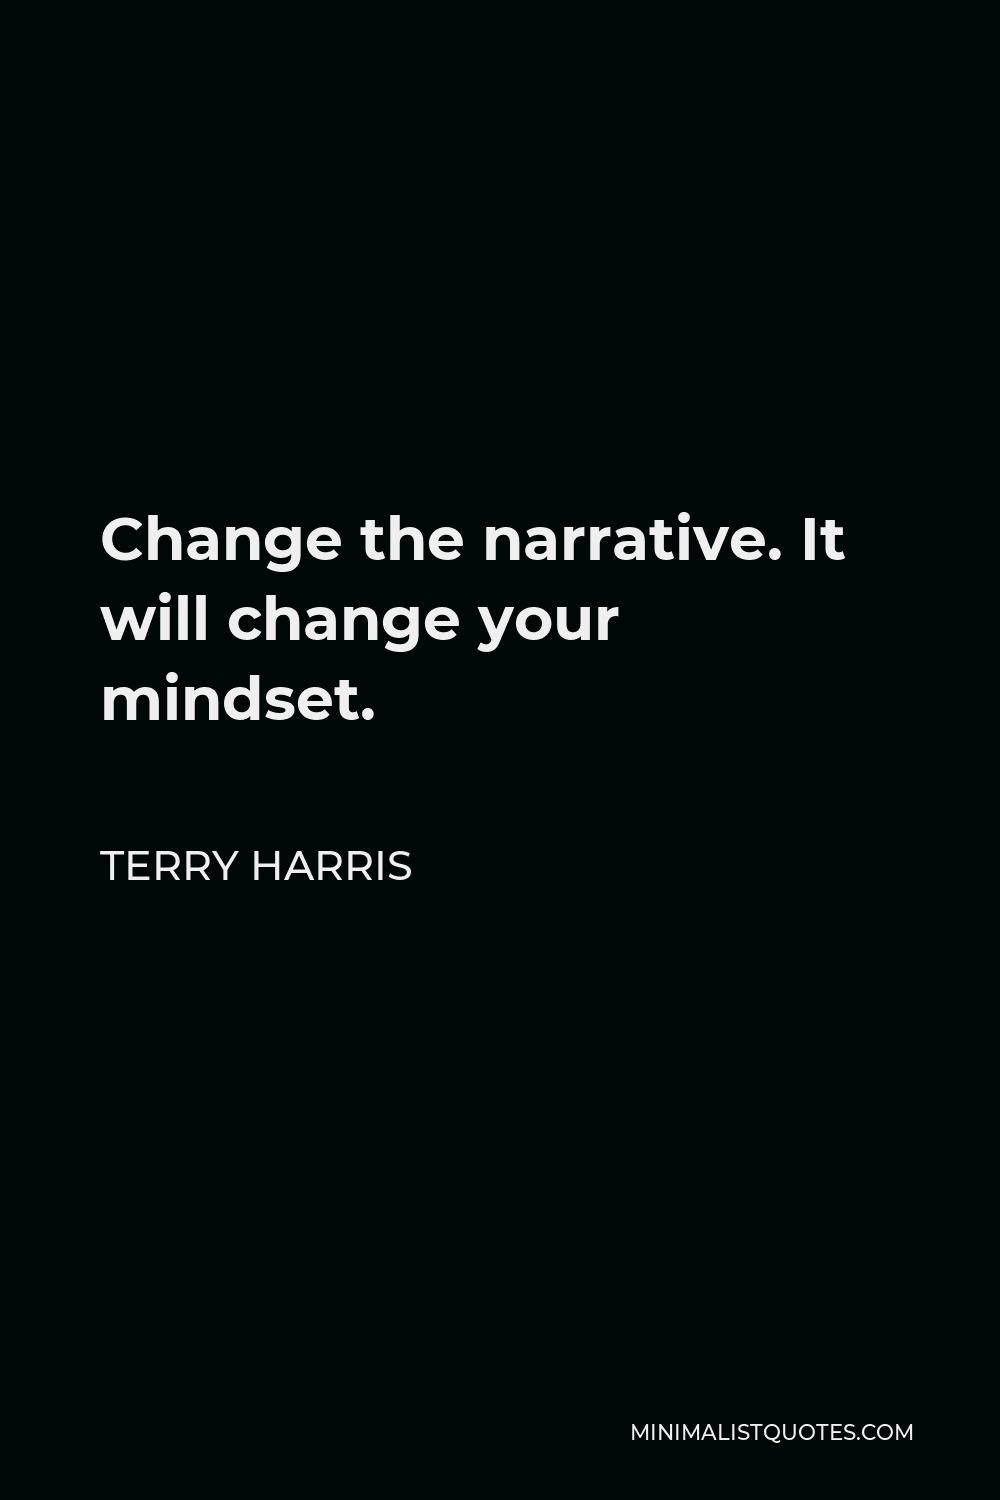 Terry Harris Quote - Change the narrative. It will change your mindset.